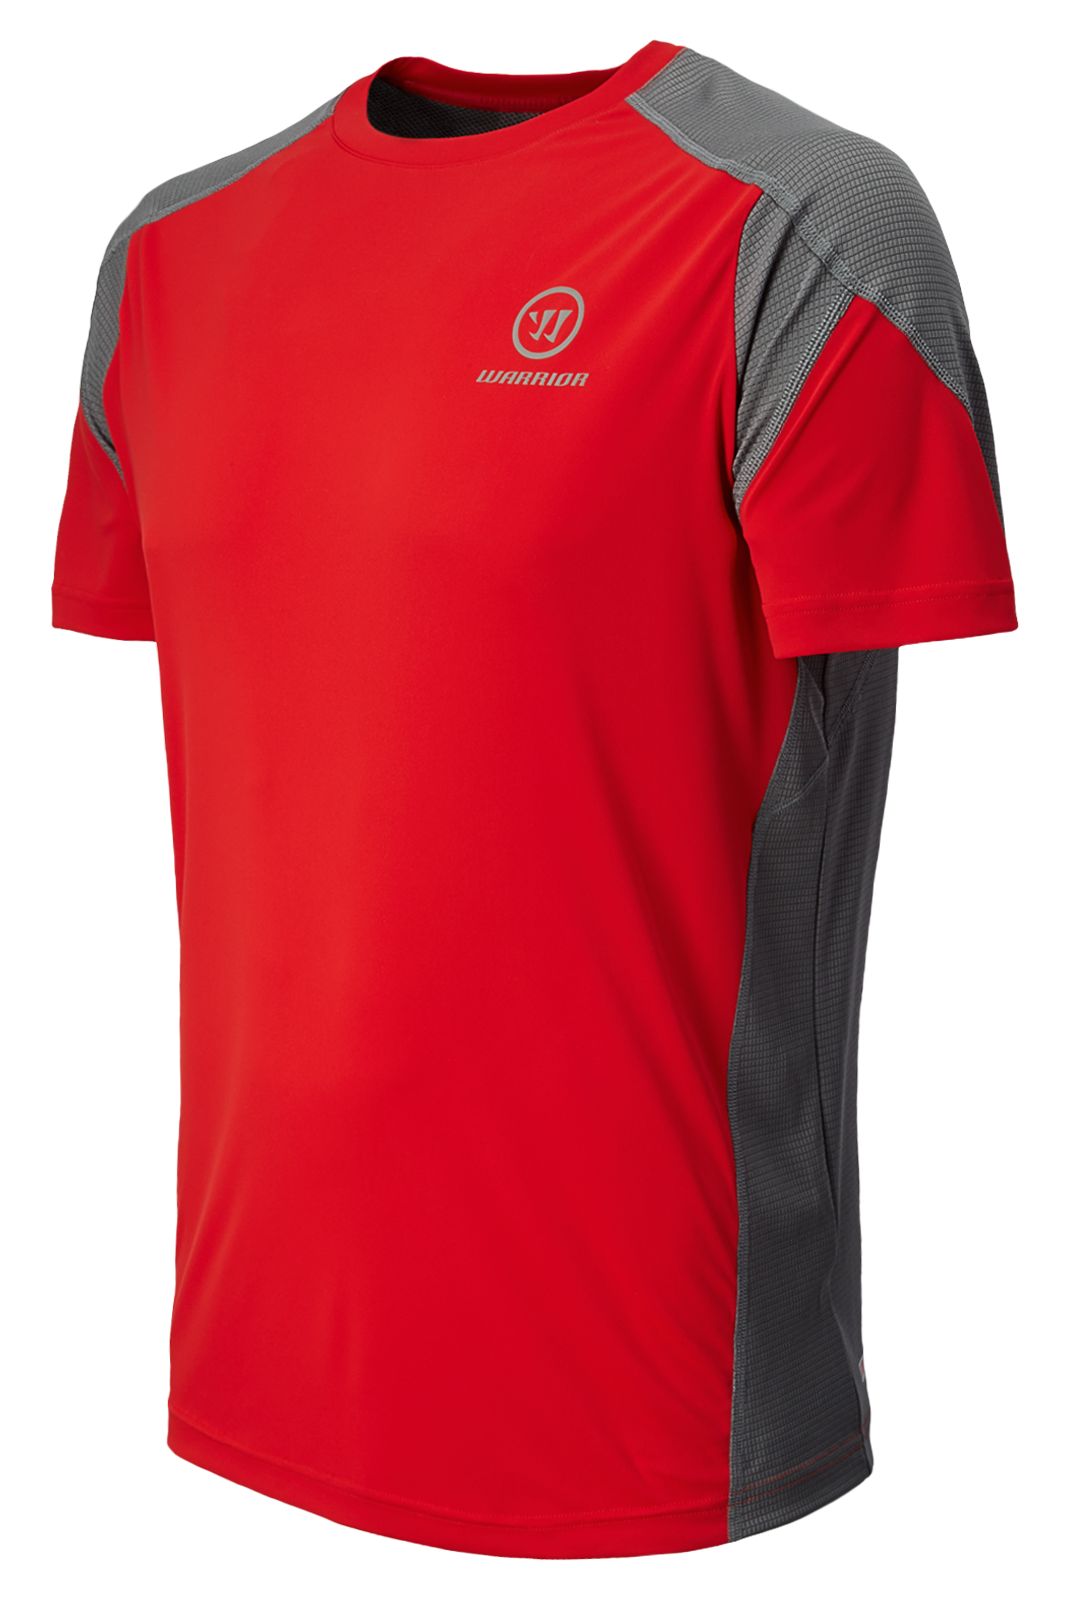 Covert Short Sleeve Top, Red image number 1